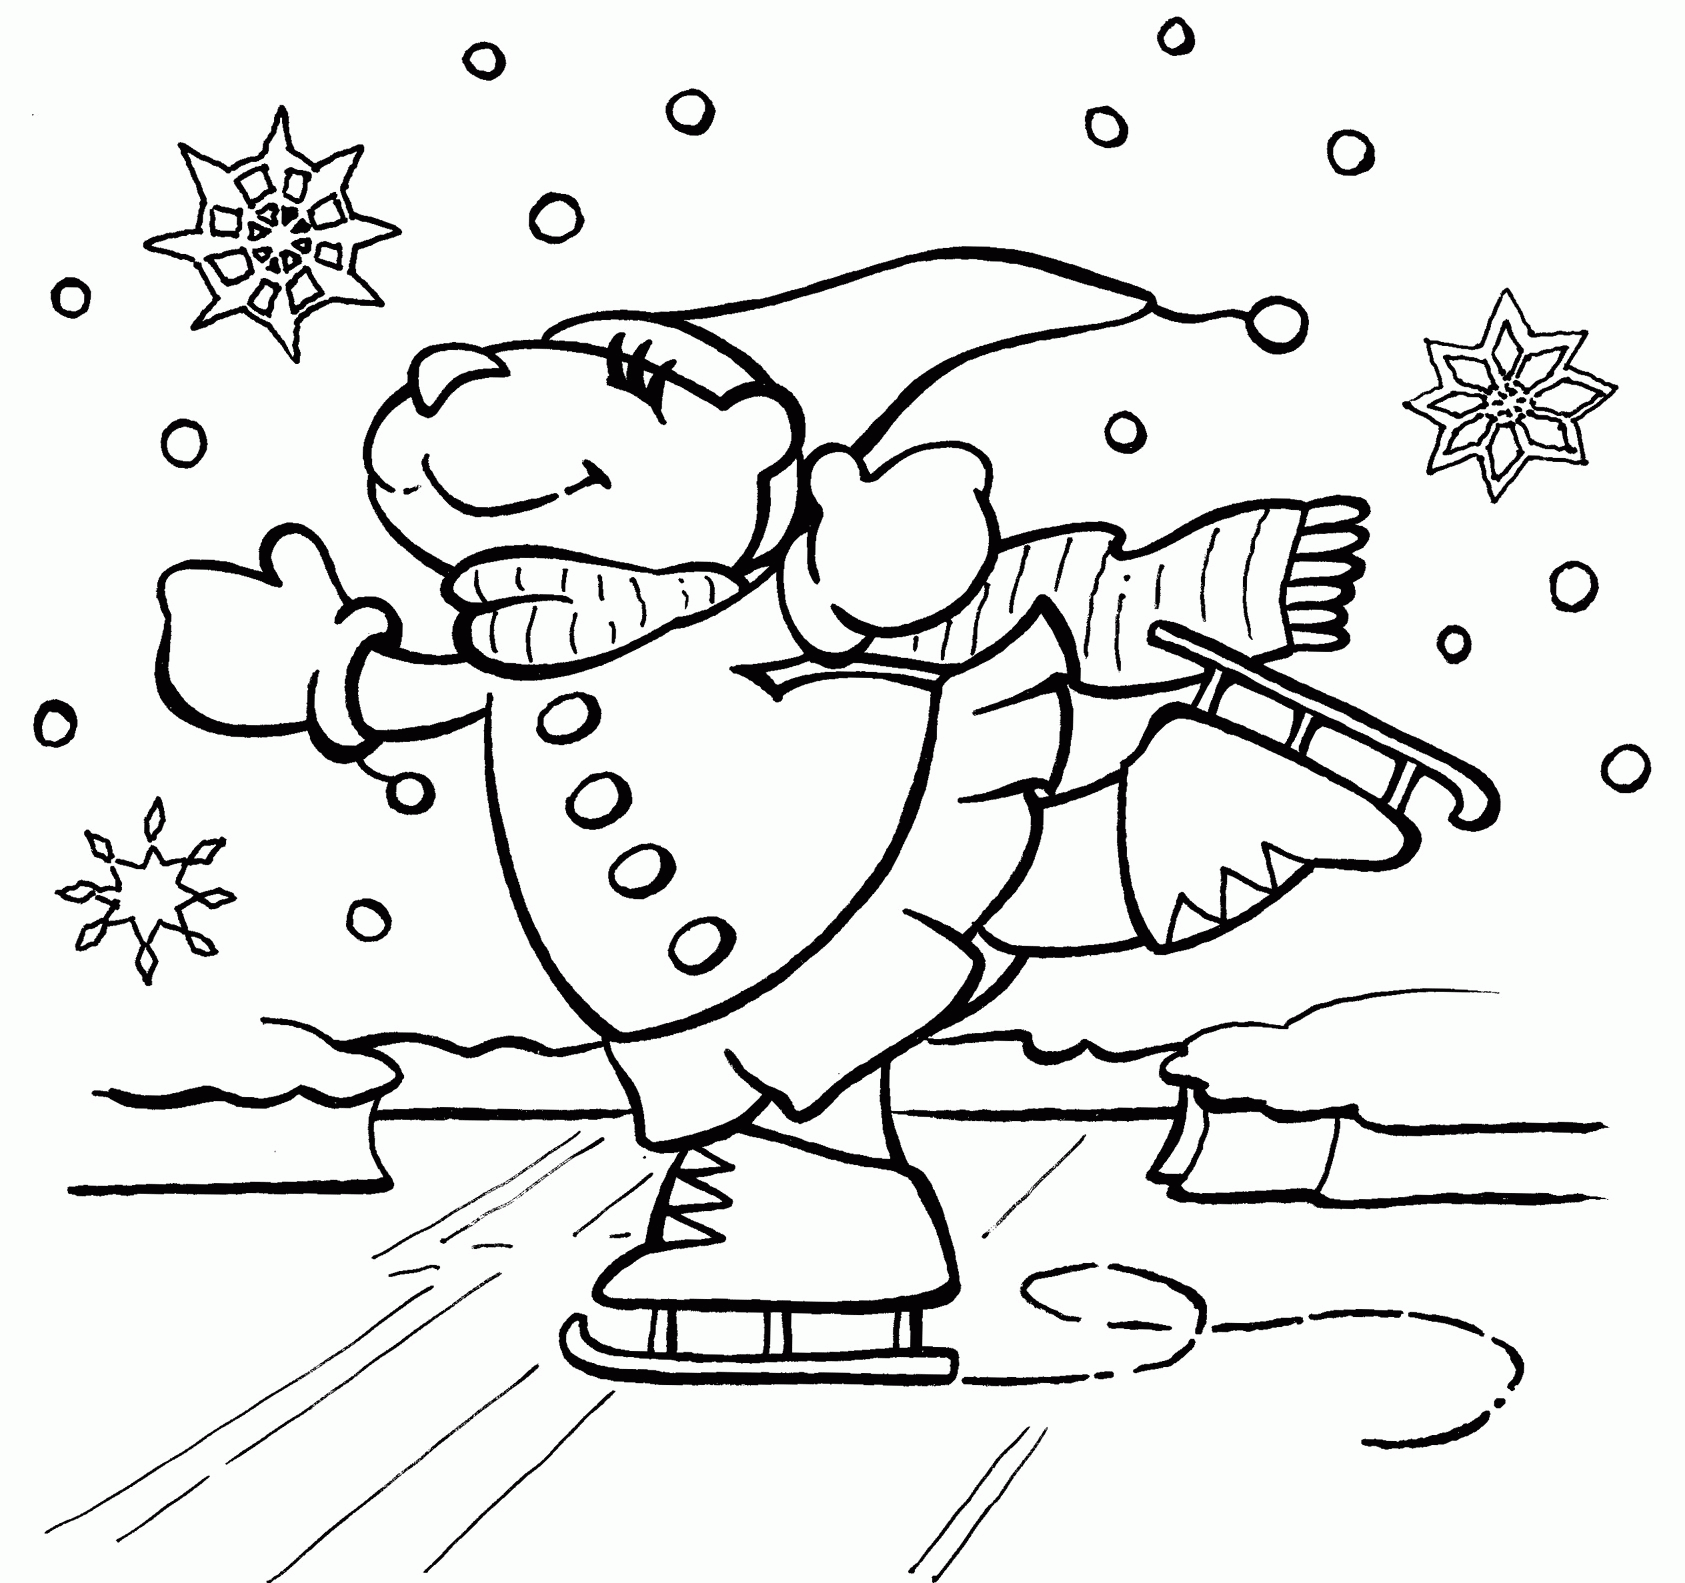 Free Coloring Pages Winter Scenes - Coloring Page